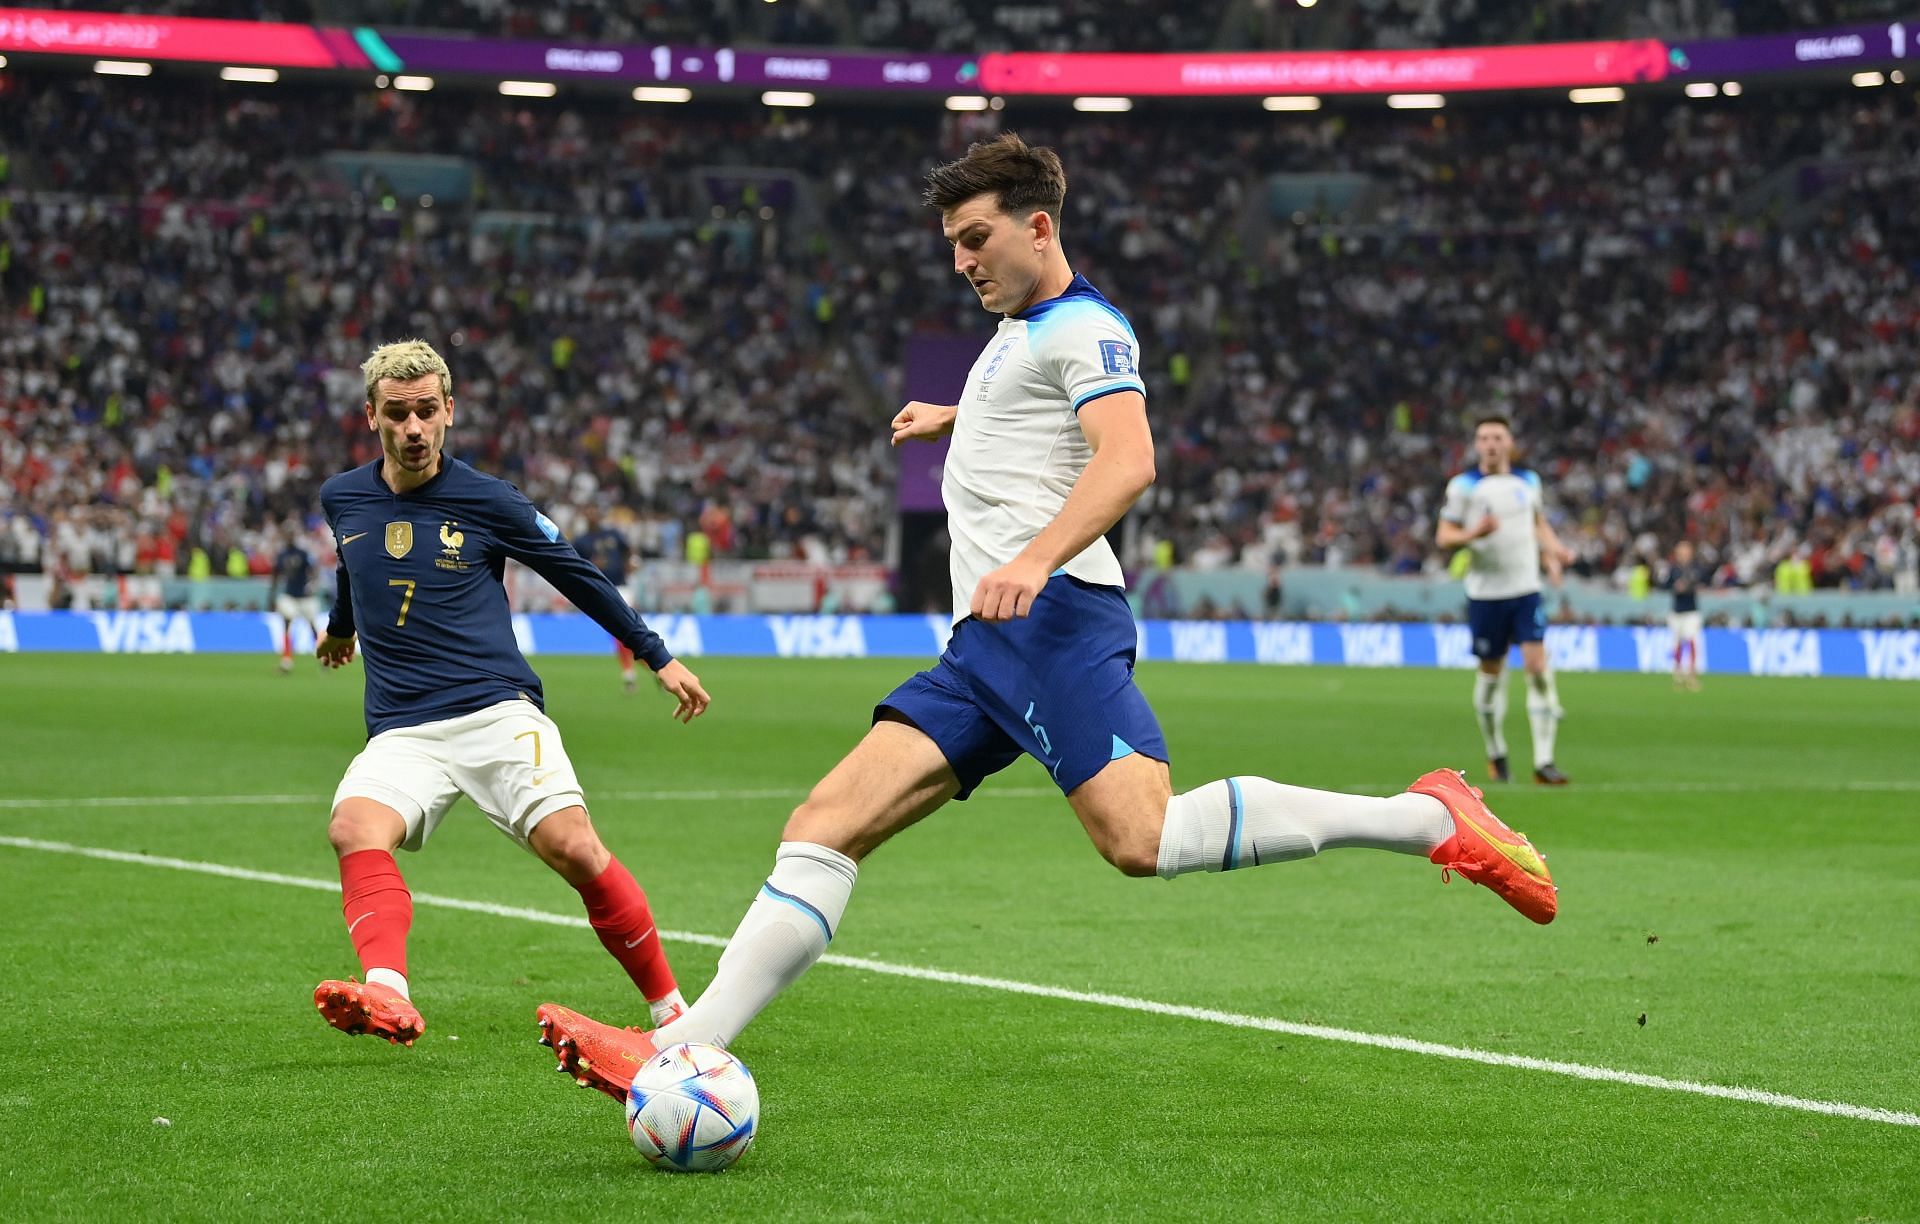 England crashed out of the World Cup following a 2-1 defeat to France in the quarterfinals.